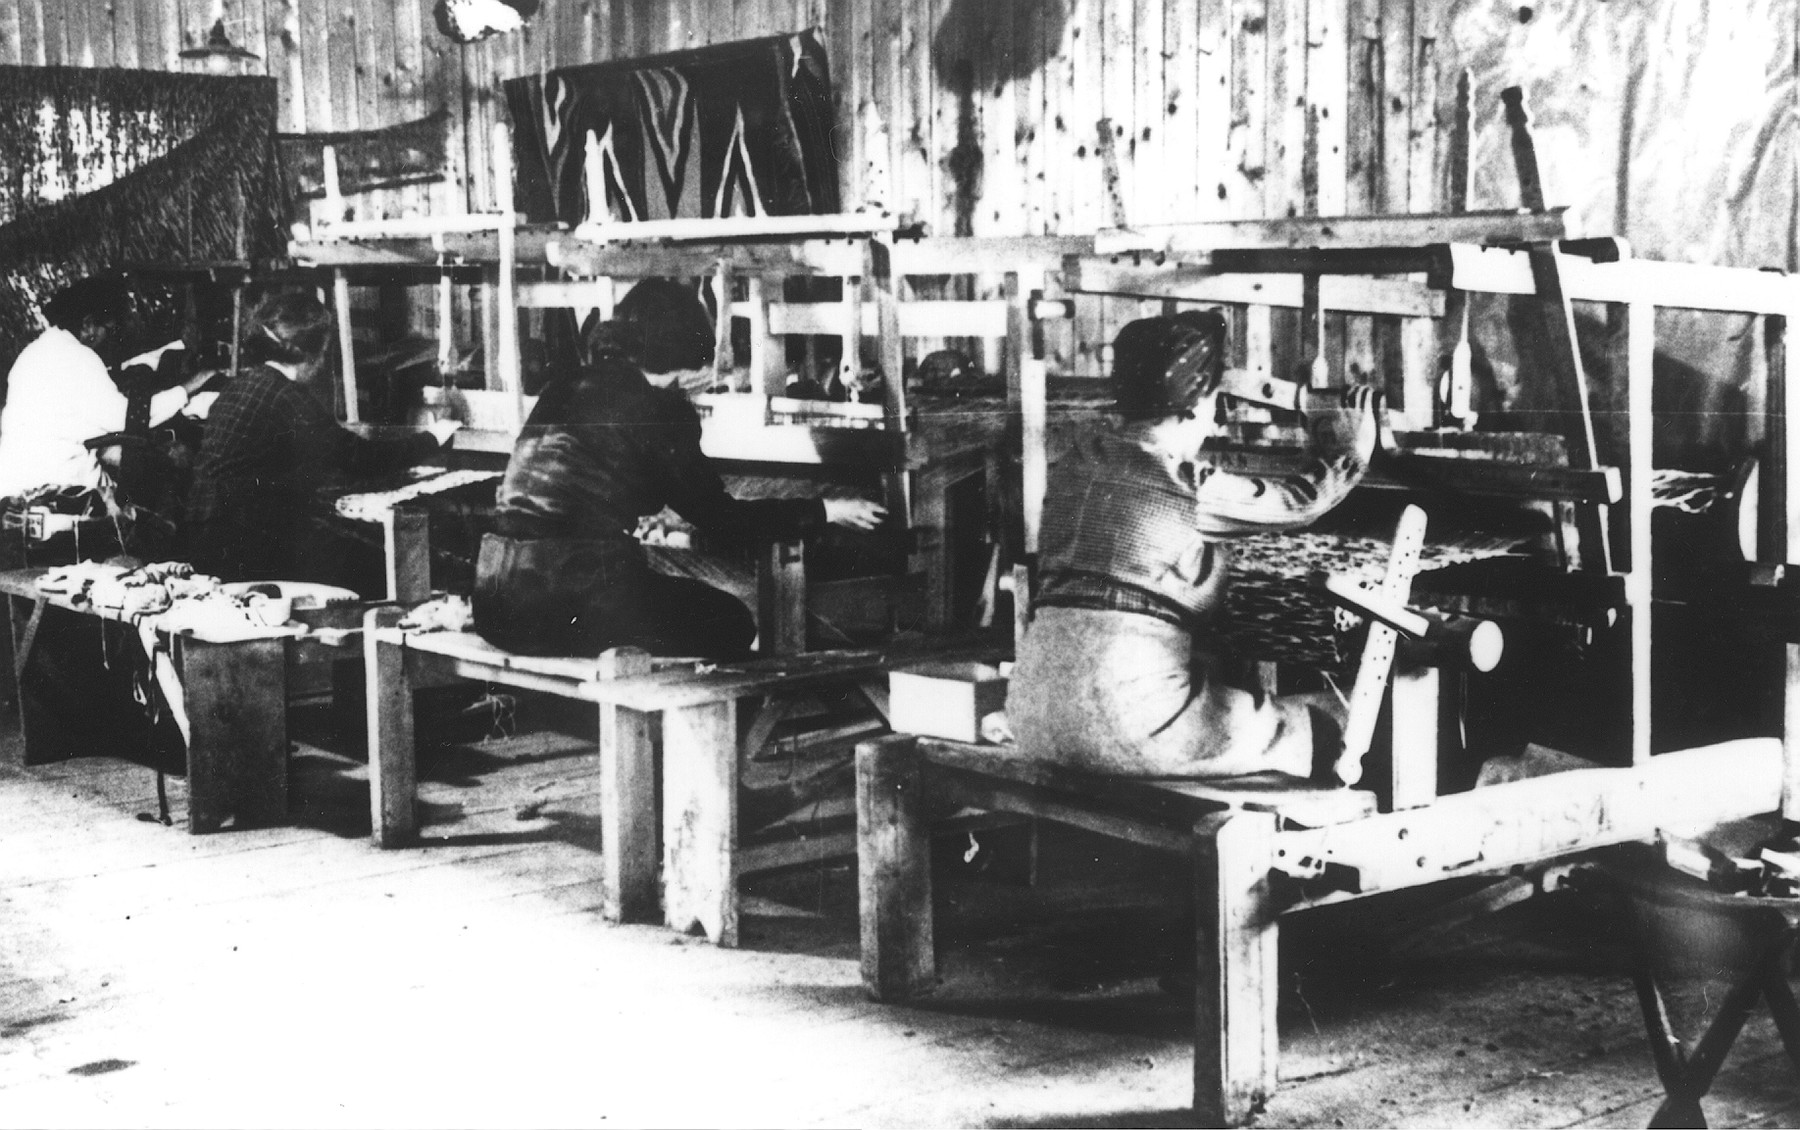 Women prisoners weaving textiles in a workshop in the Novaky labor camp.